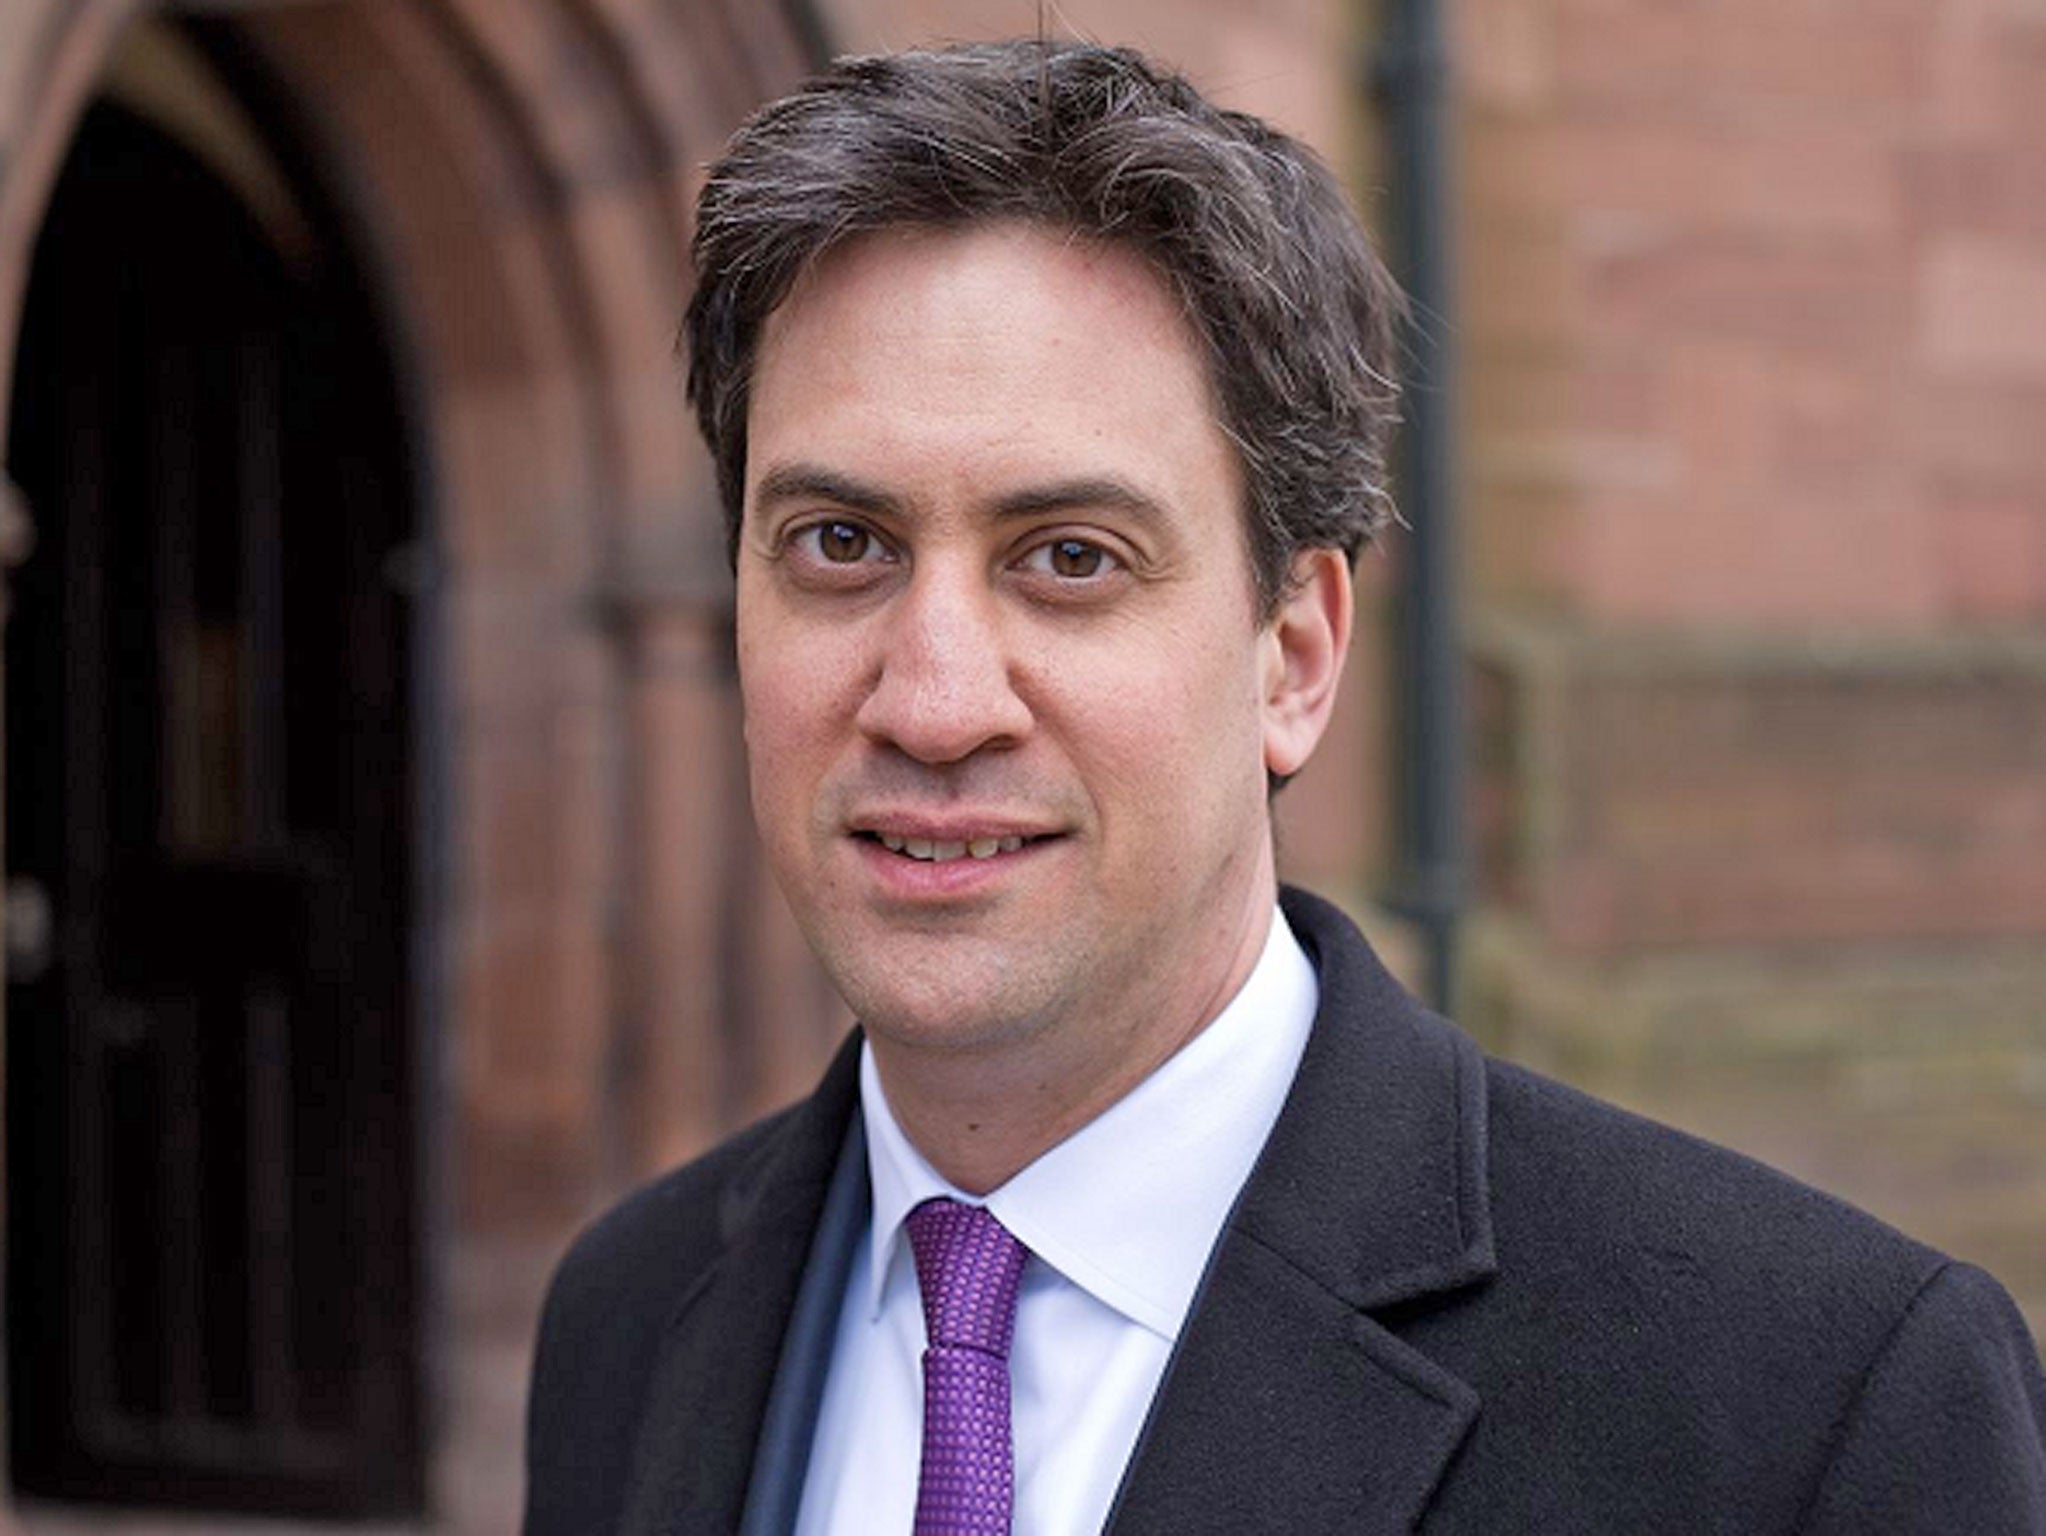 Ed Miliband: “Too many councils are finding they don’t have the real power to stand up for local people”